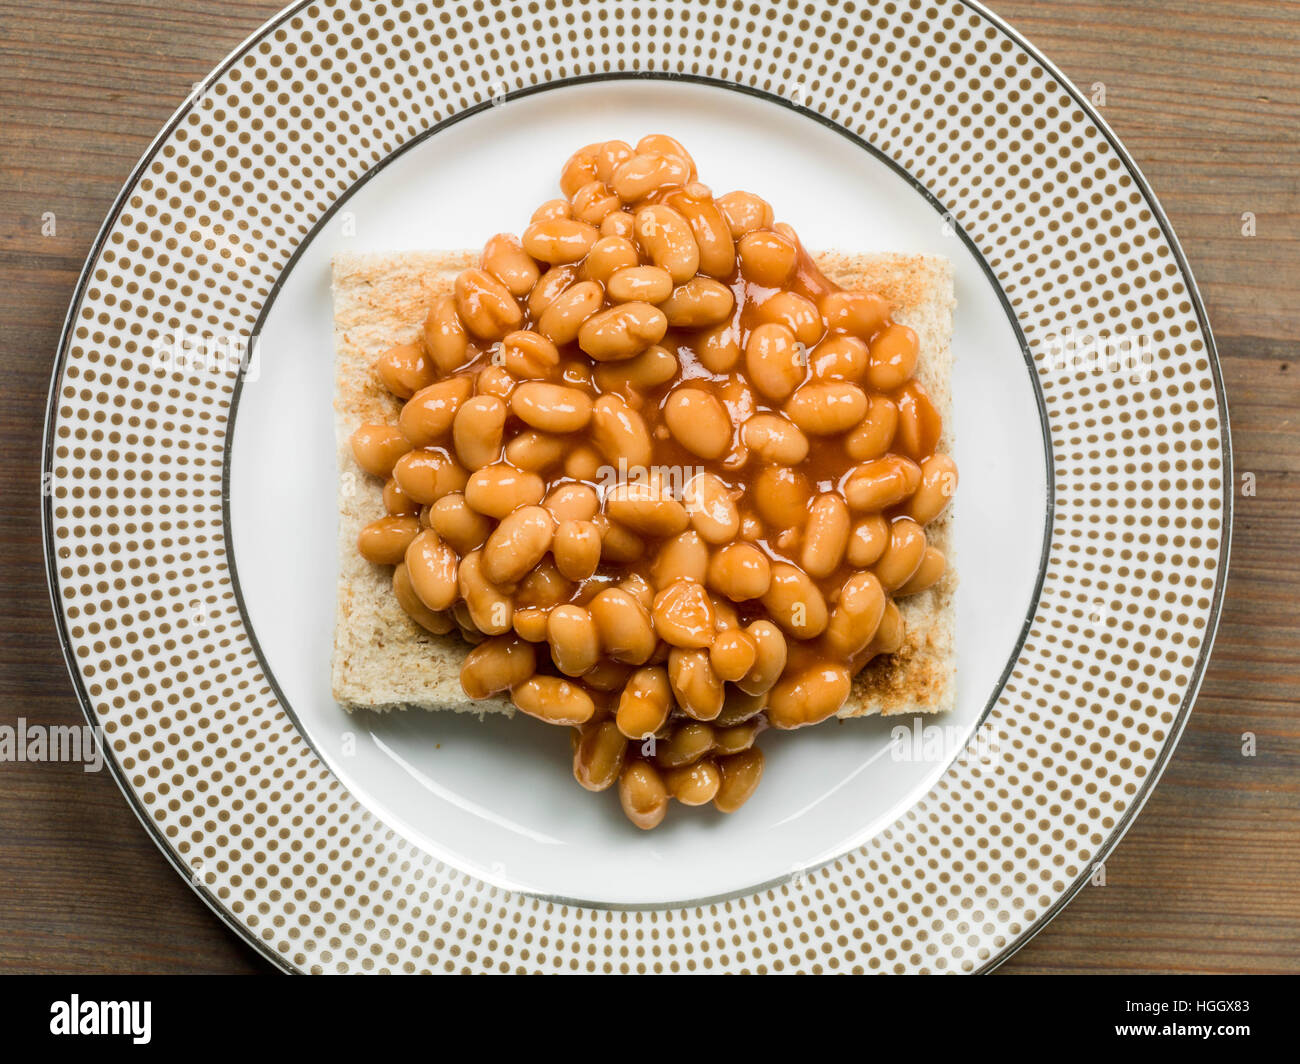 Cooked Breakfast or Snack of Baked Beans on Toast Stock Photo